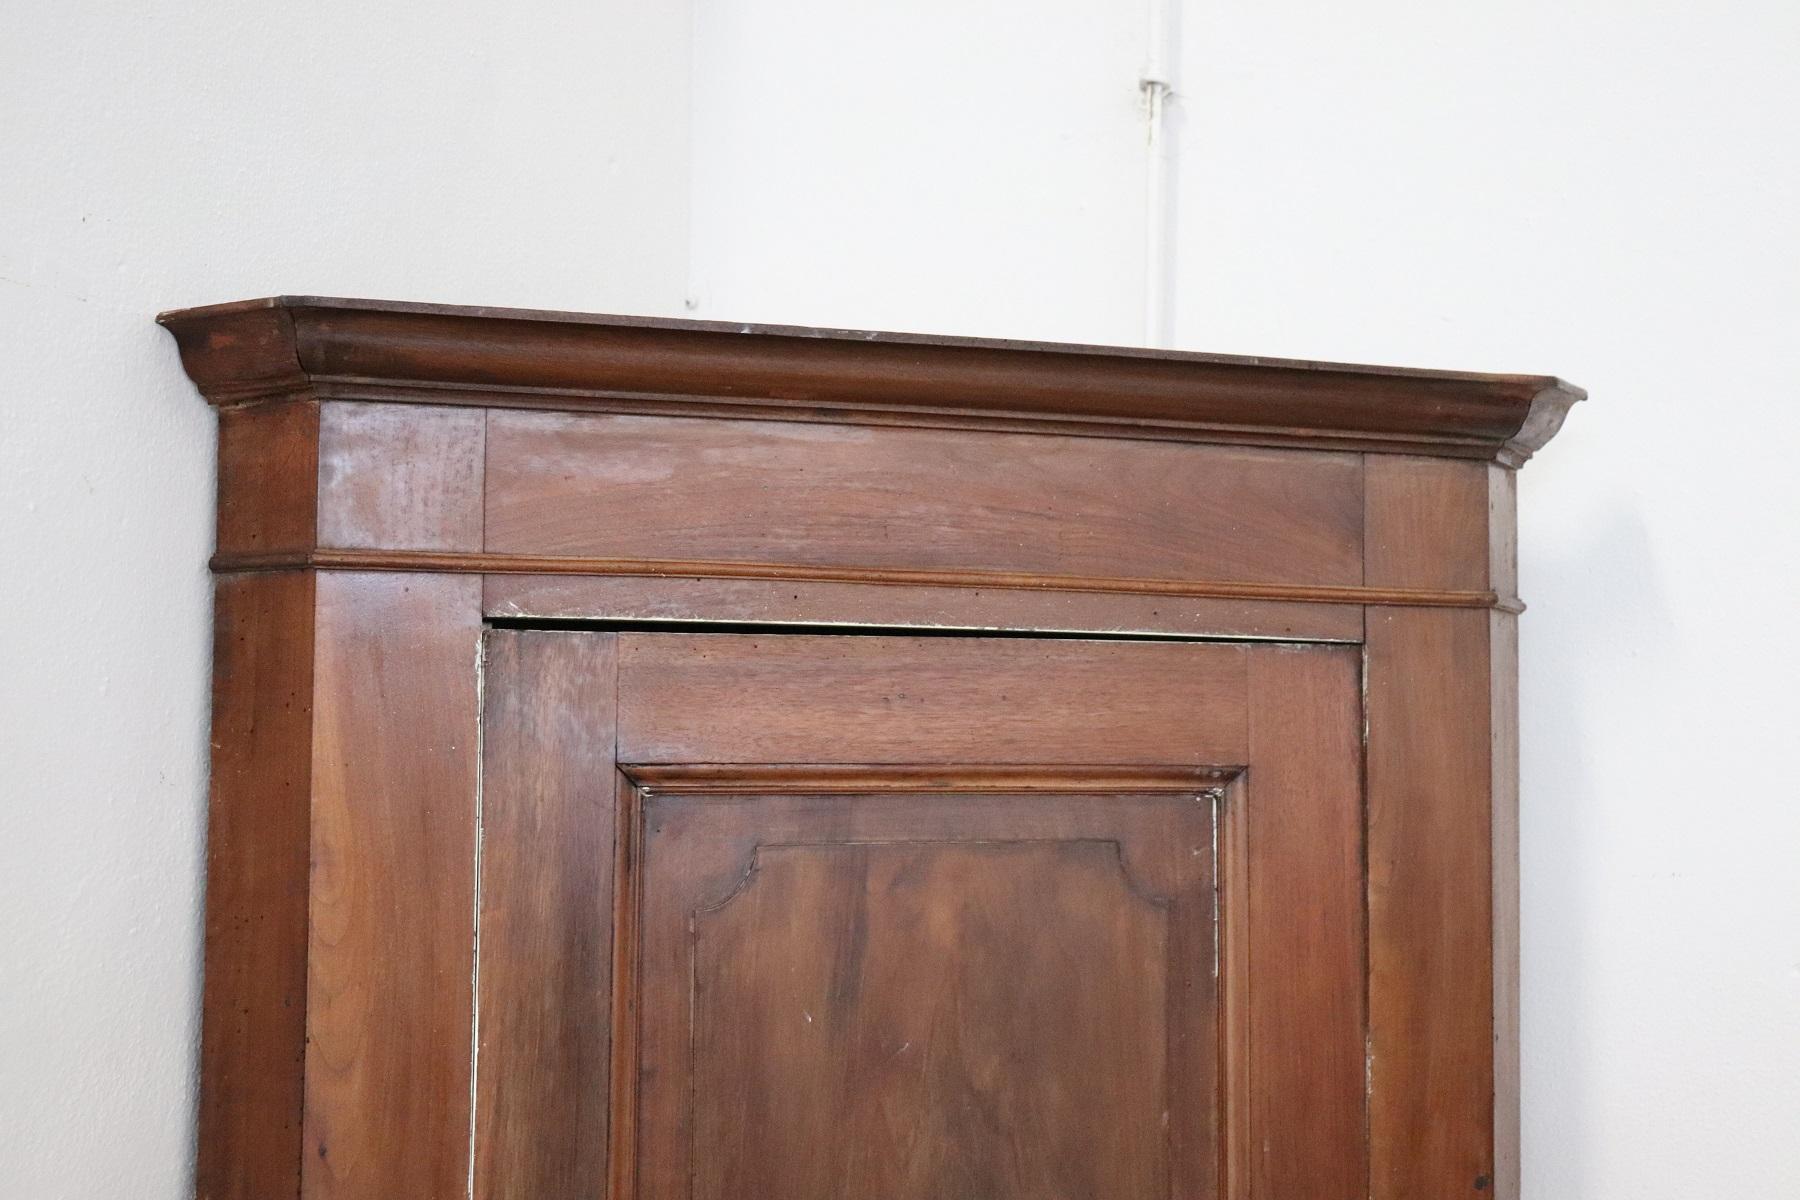 Italian corner cupboard, 1850s. High quality furniture in walnut wood. The front door has a decorative panel. Very simple and perfect for any environment. Internally it had been modified to become a small coat rack but shelves can be made. White